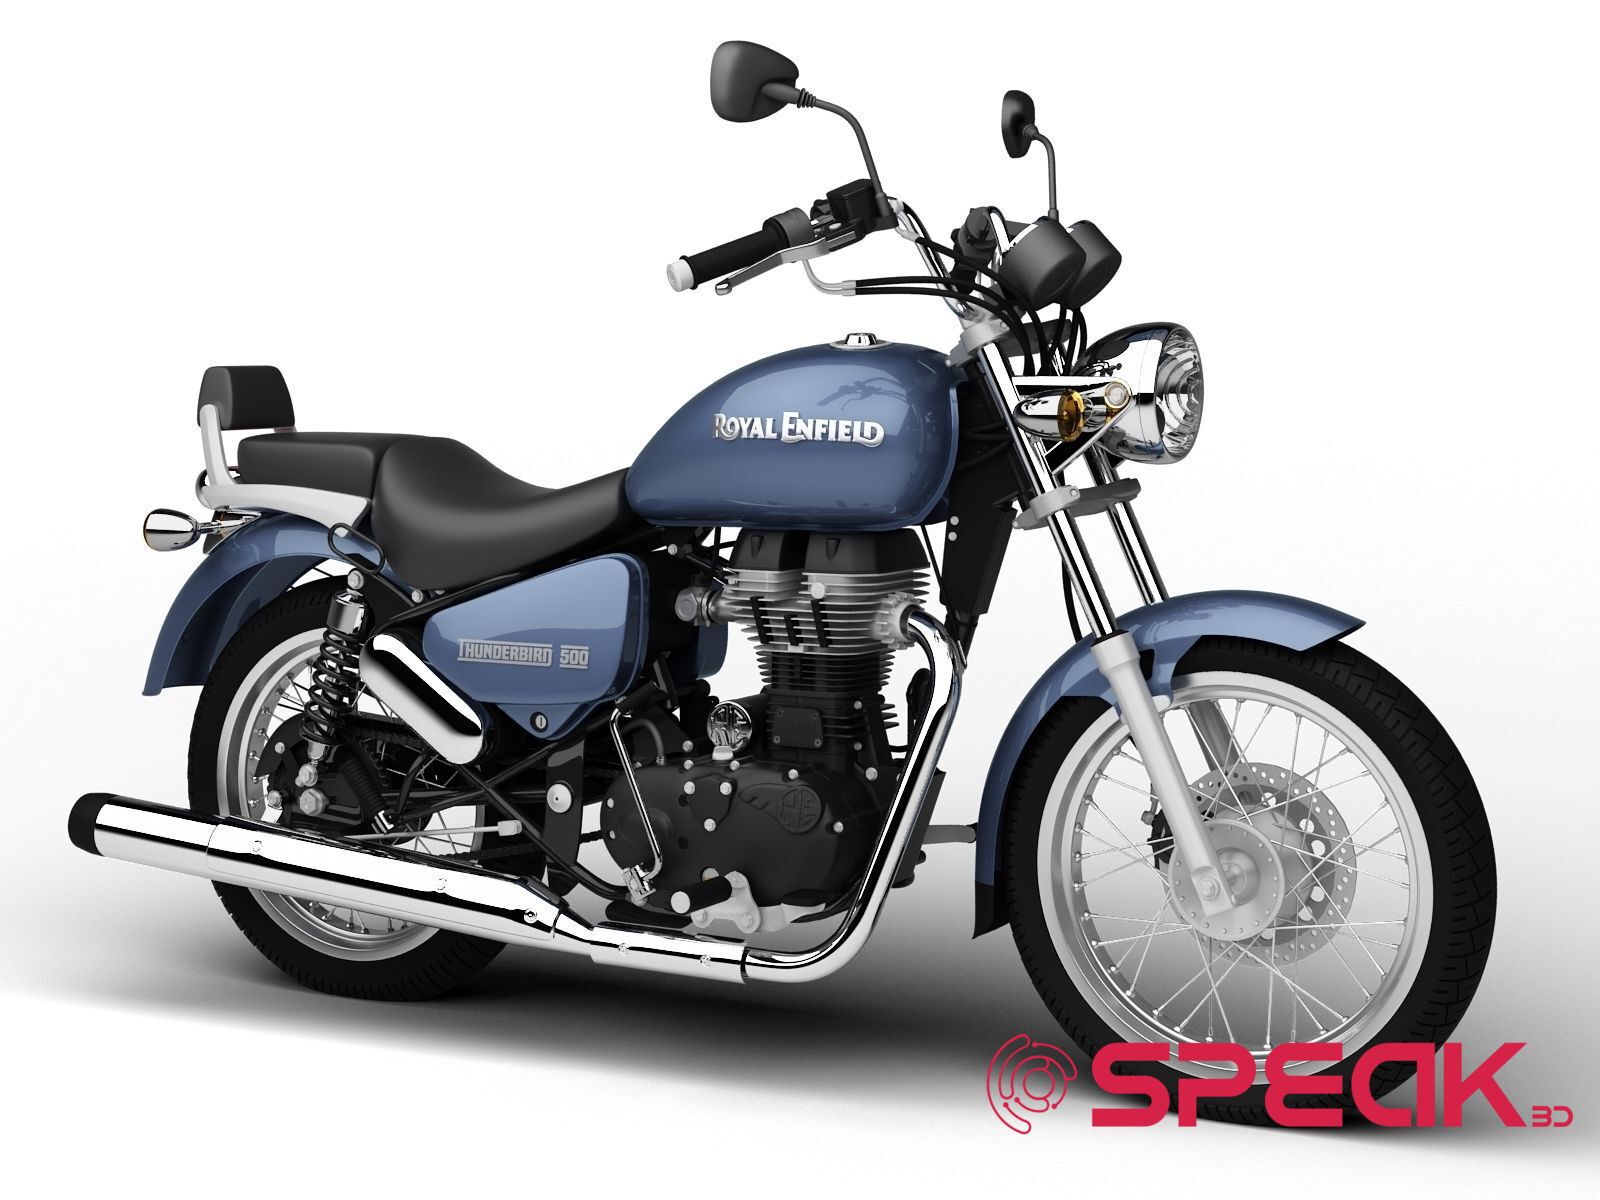 Royal Enfield Thunderbird 350 - Pictures